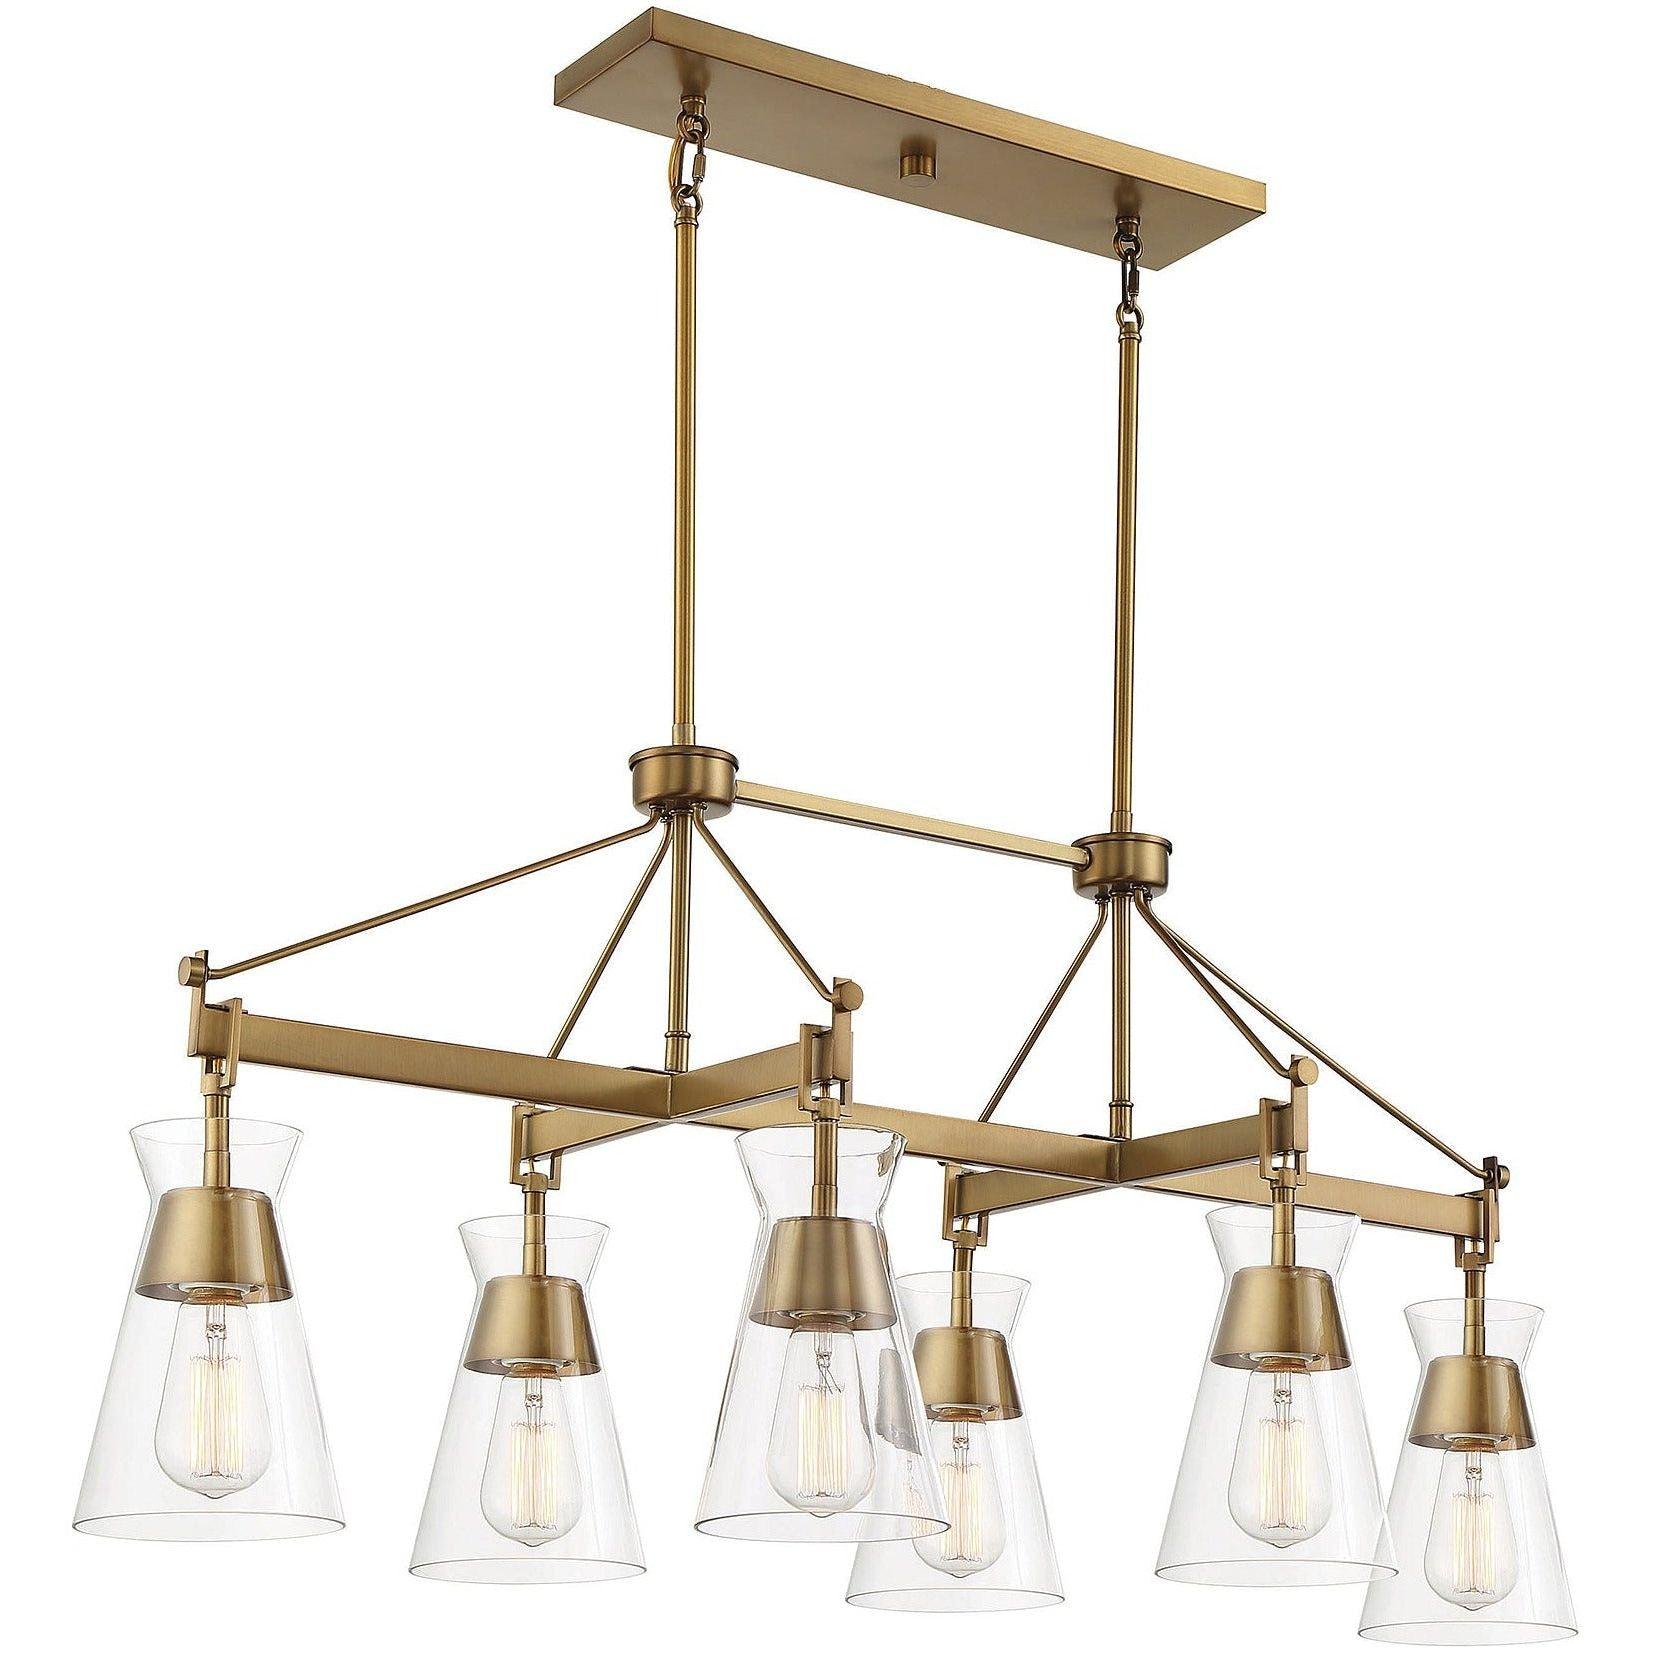 Savoy House - Lakewood 6-Light Linear Chandelier - Lights Canada